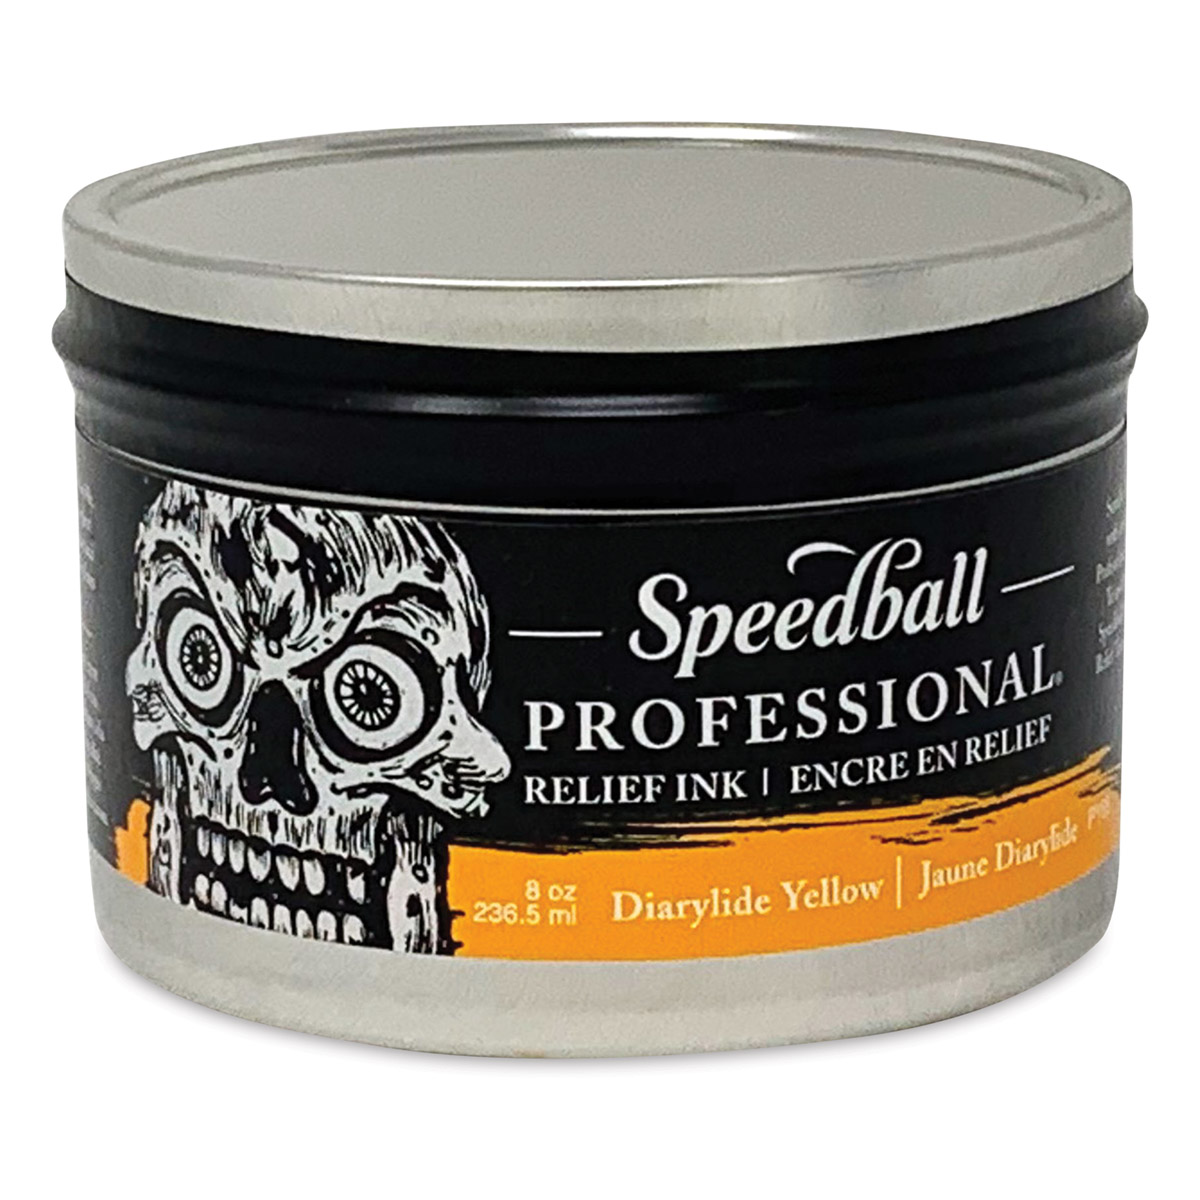 Speedball Professional Relief Ink - Diarylide Yellow, 8 oz